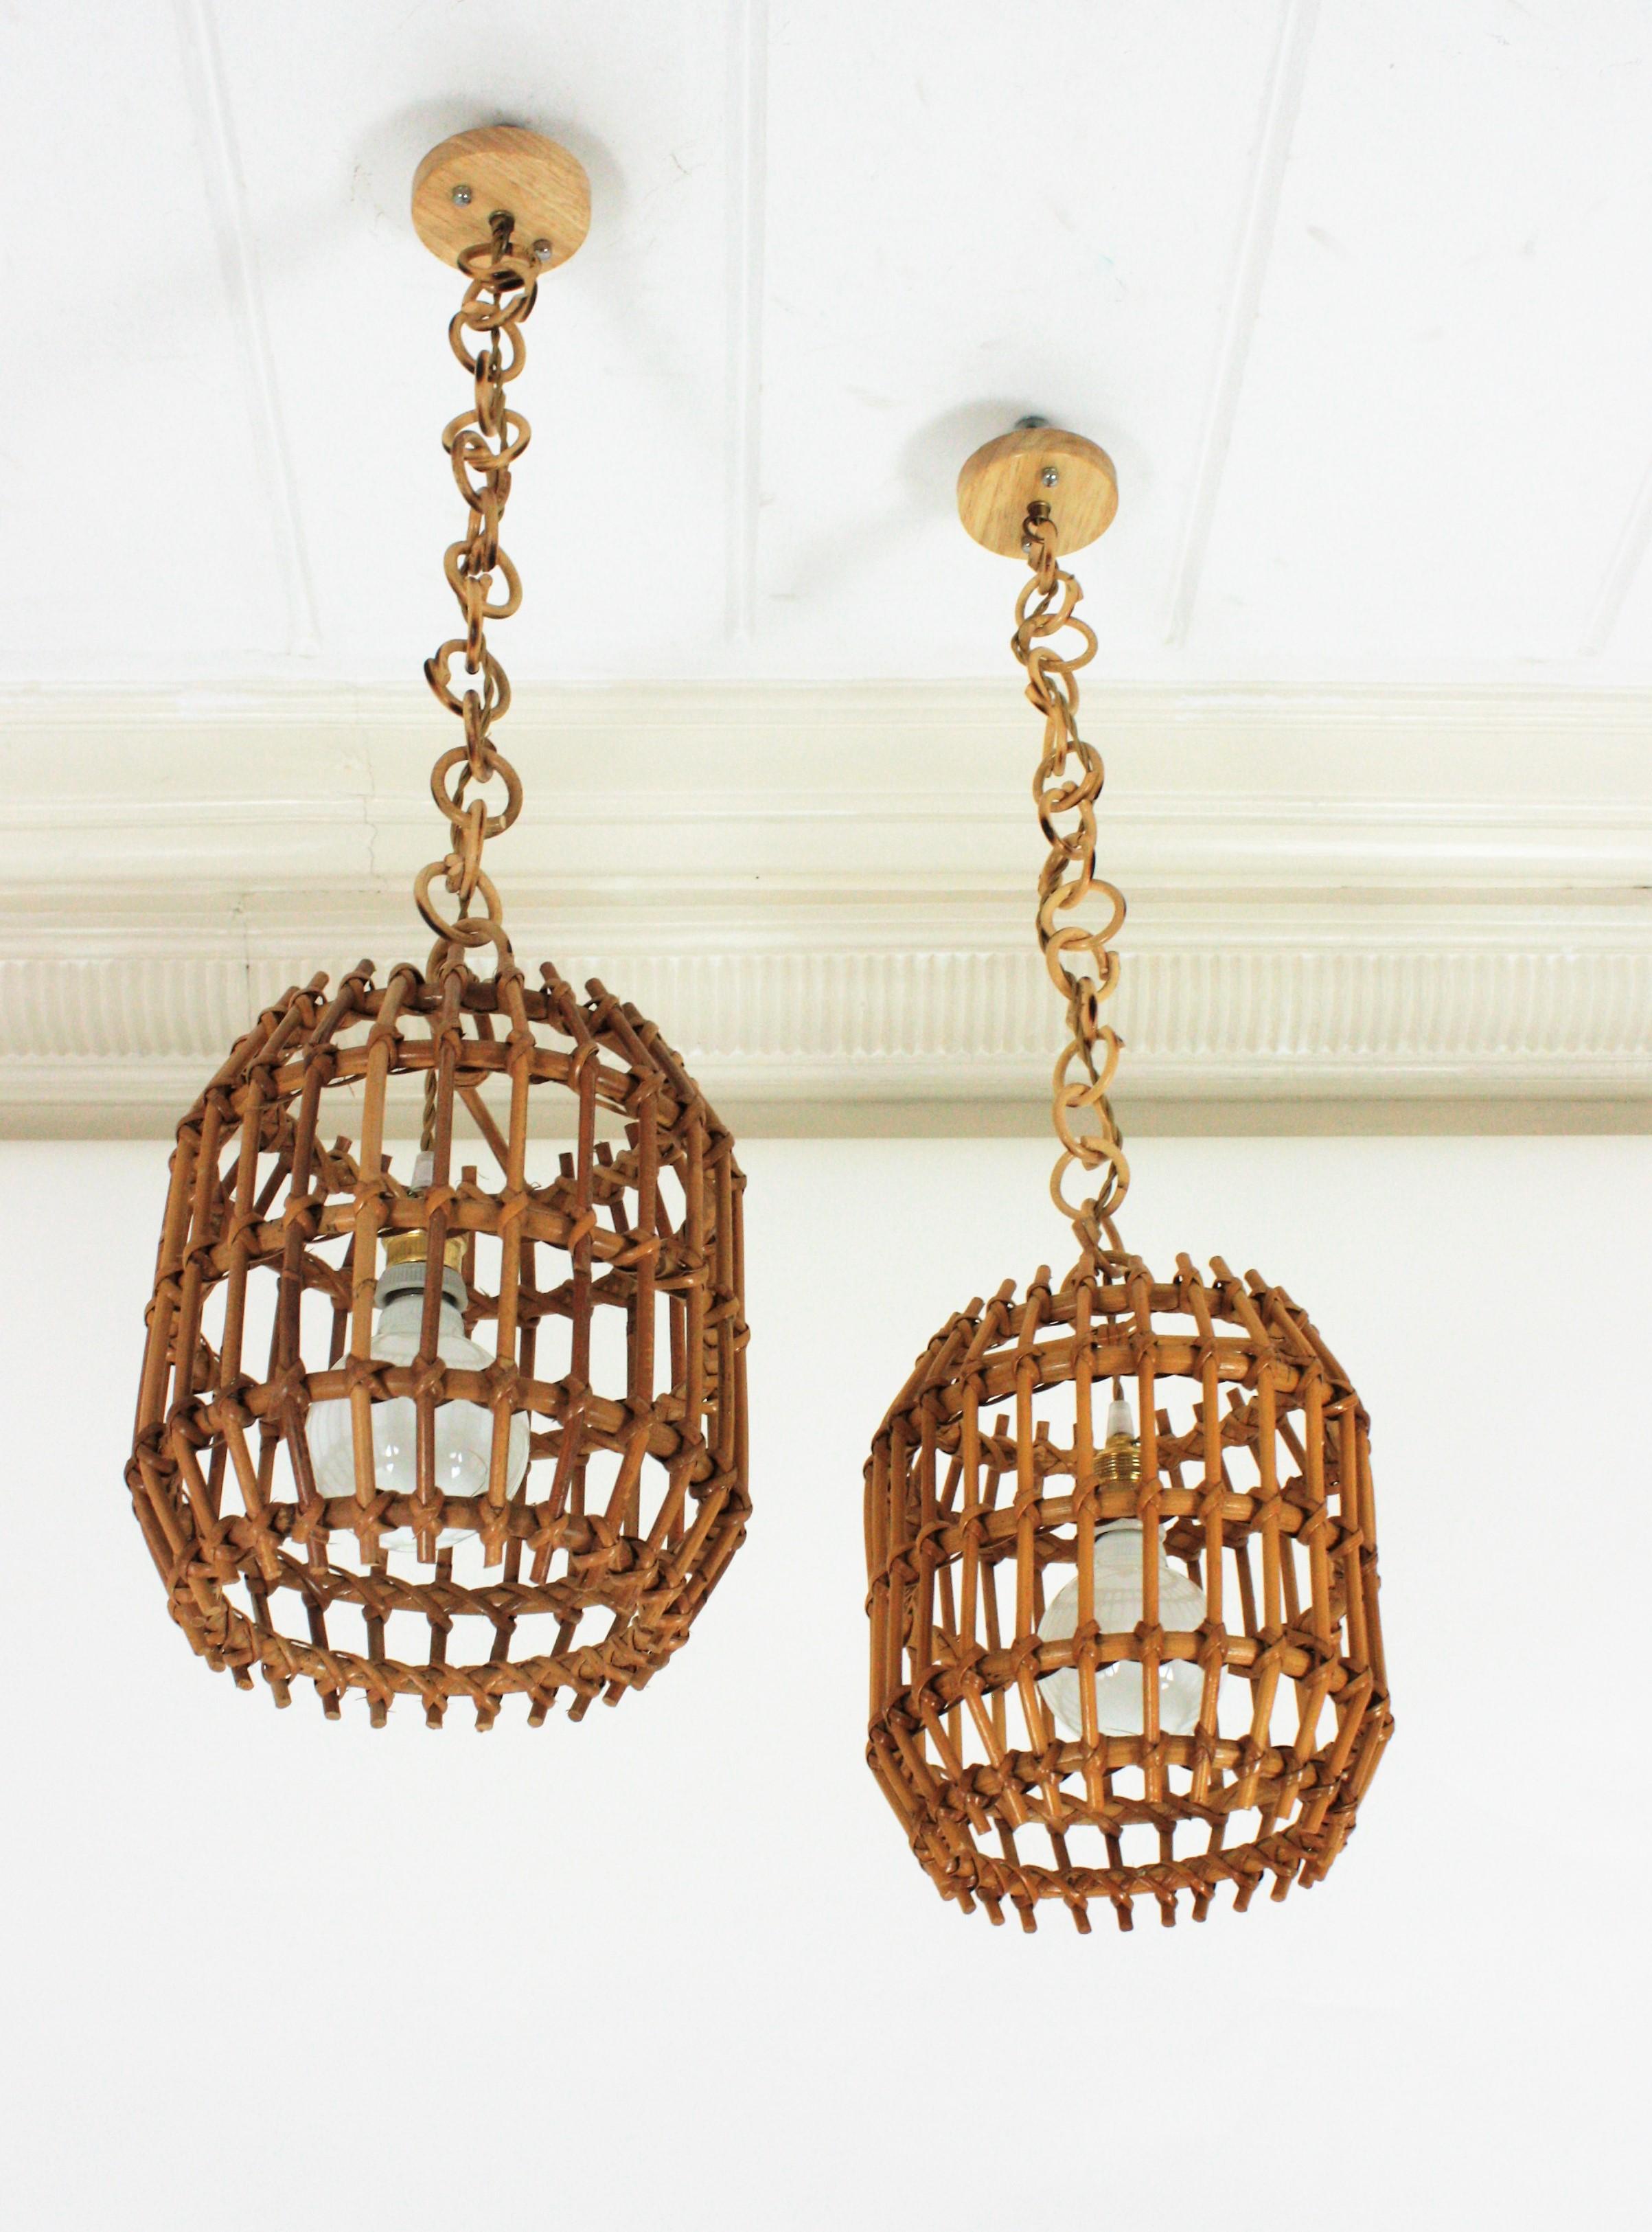 Pair of Rattan Pendant Lights or Lanterns, 1960s For Sale 5